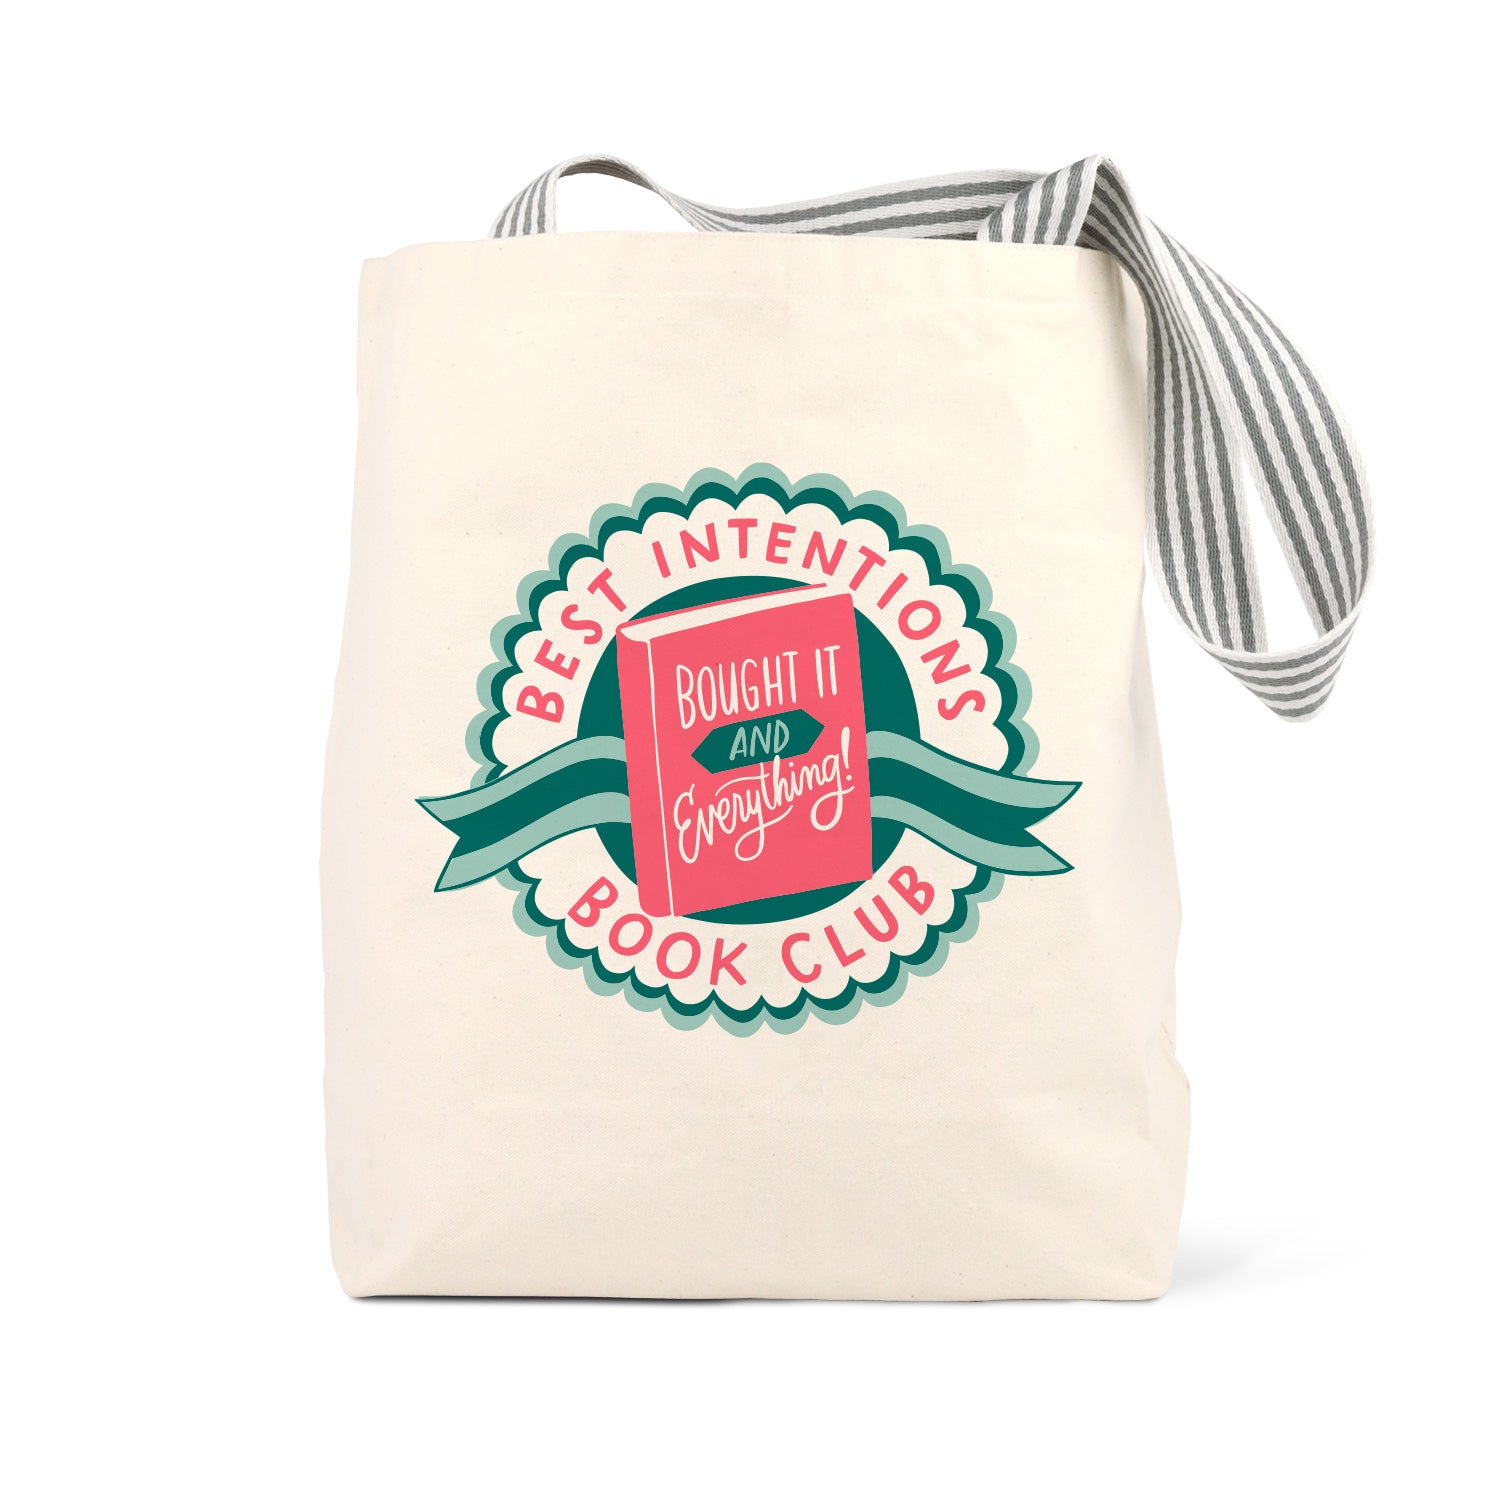 Best Intentions Book Club Tote